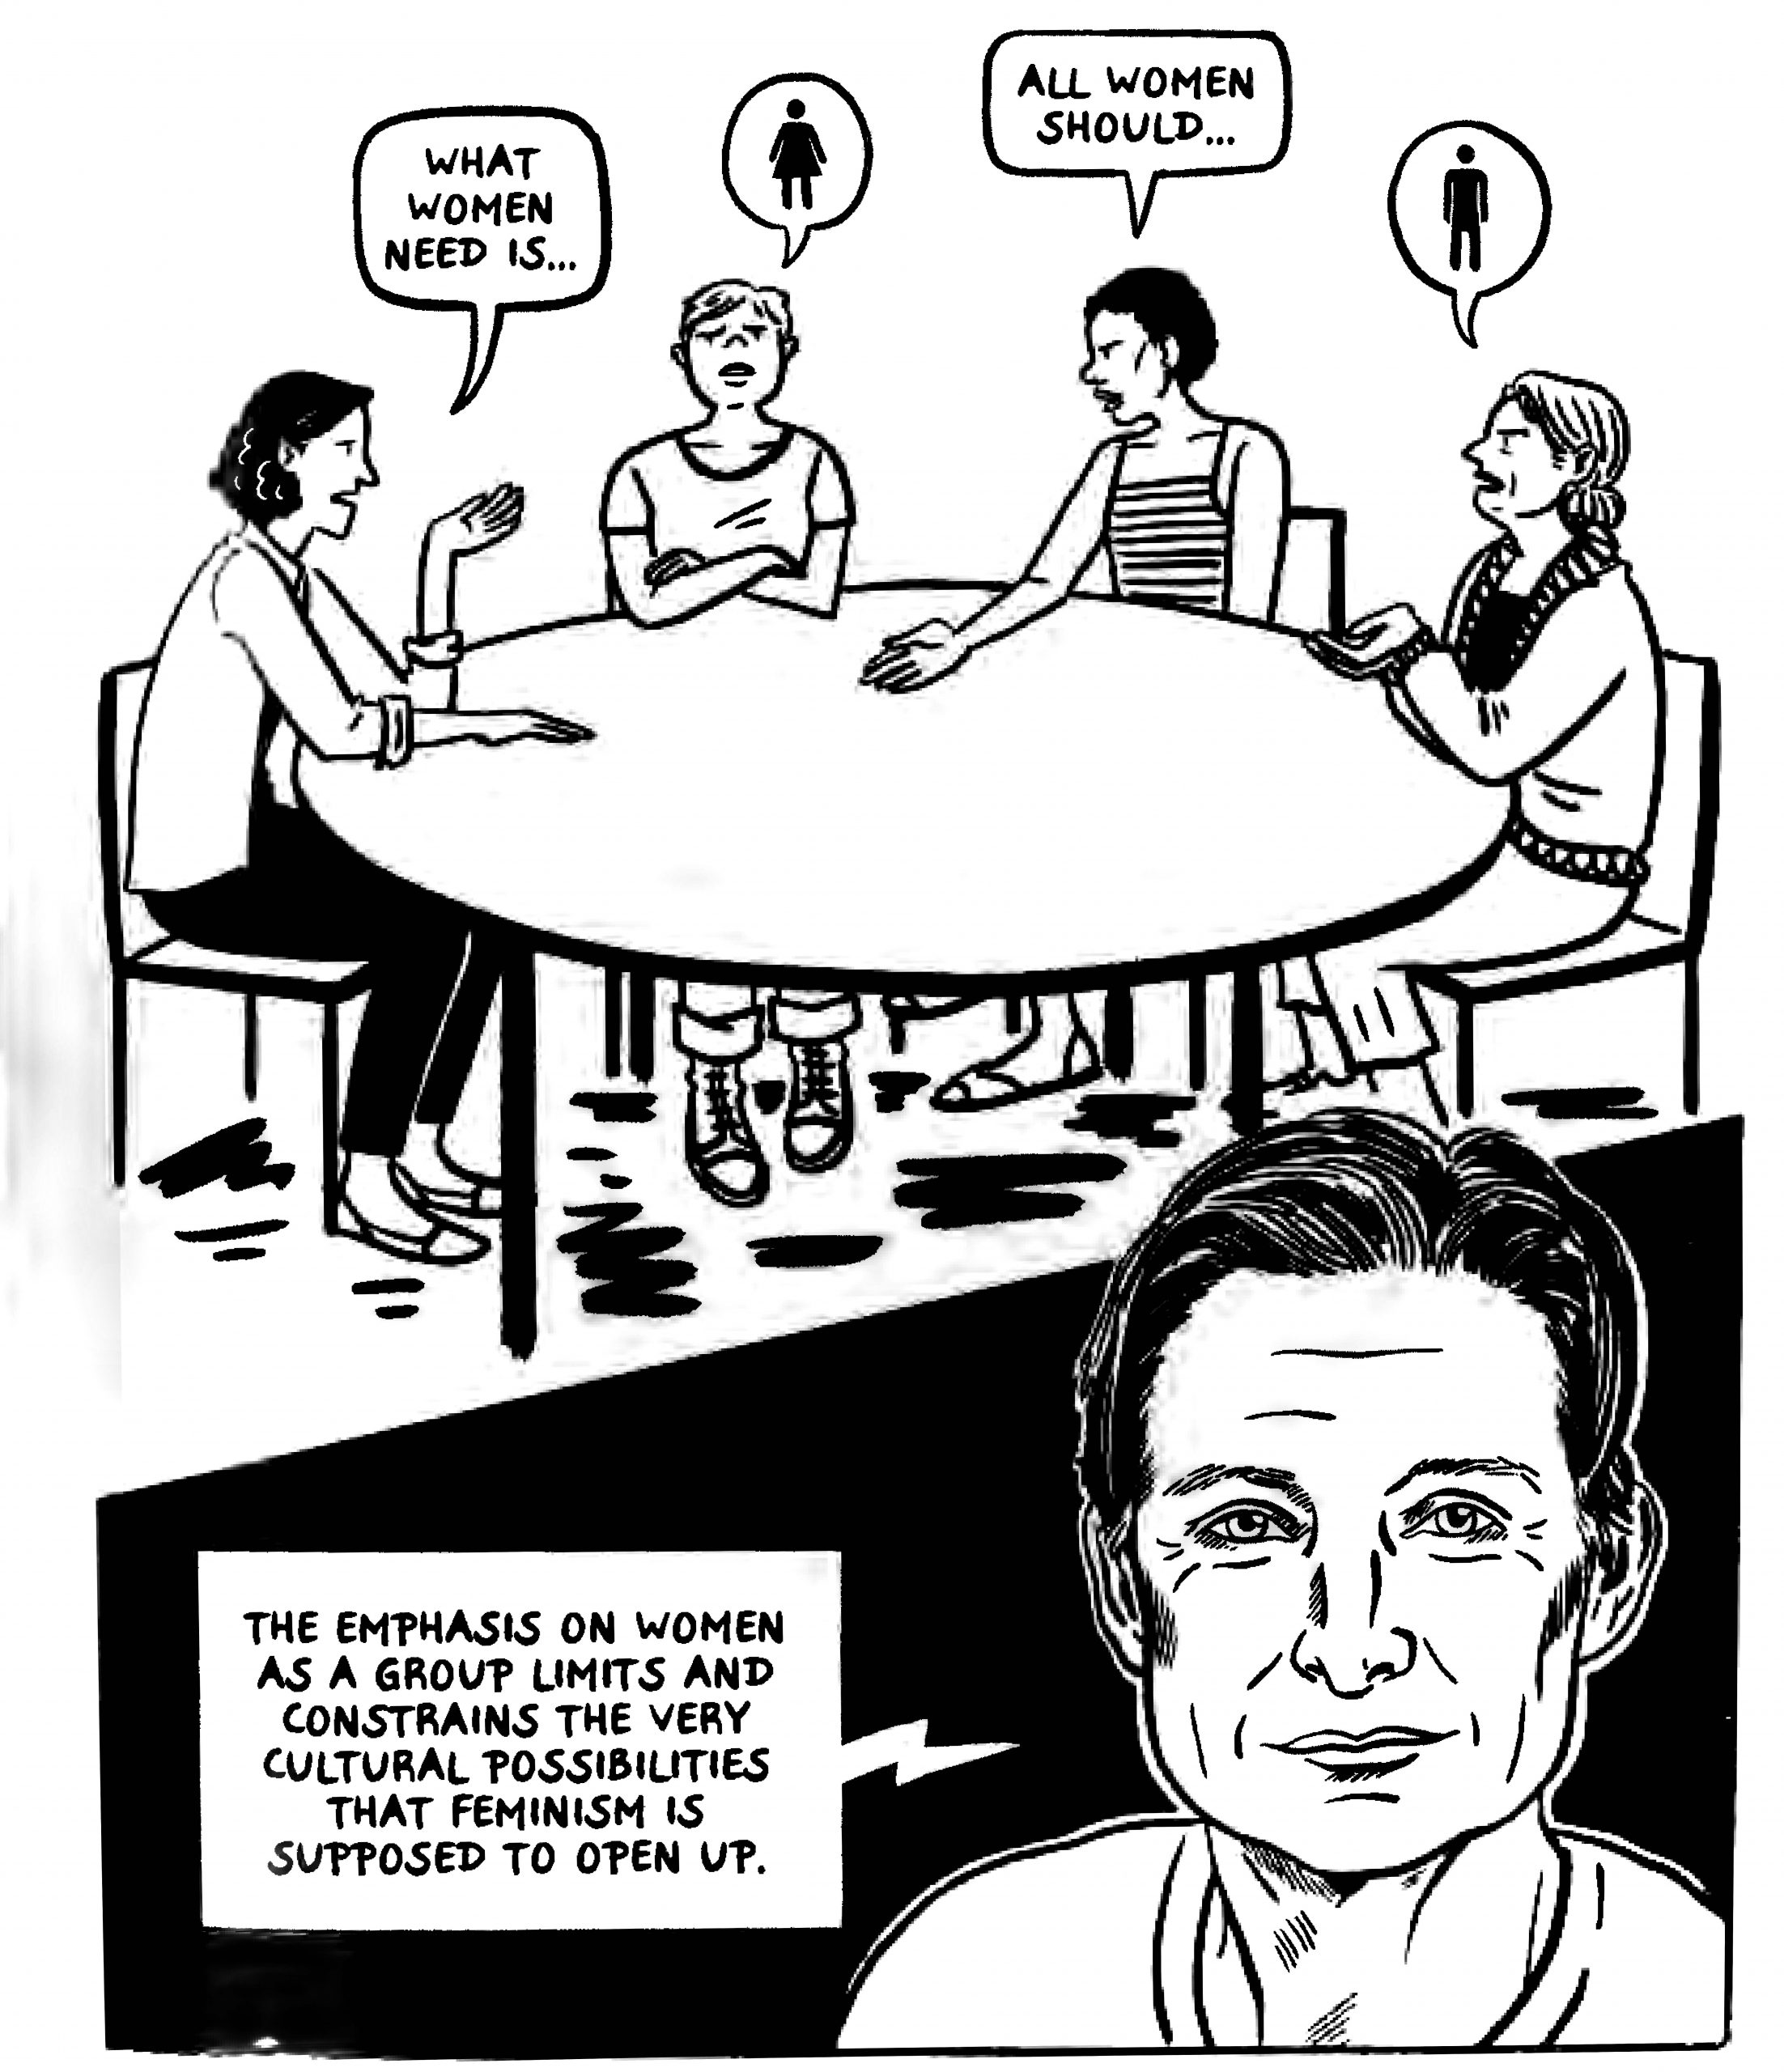 A graphic of a woman in front of a table of women discussing feminism, saying "The emphasis on women as a group limits and constrains the very cultural possibilities that feminism is supposed to open up."